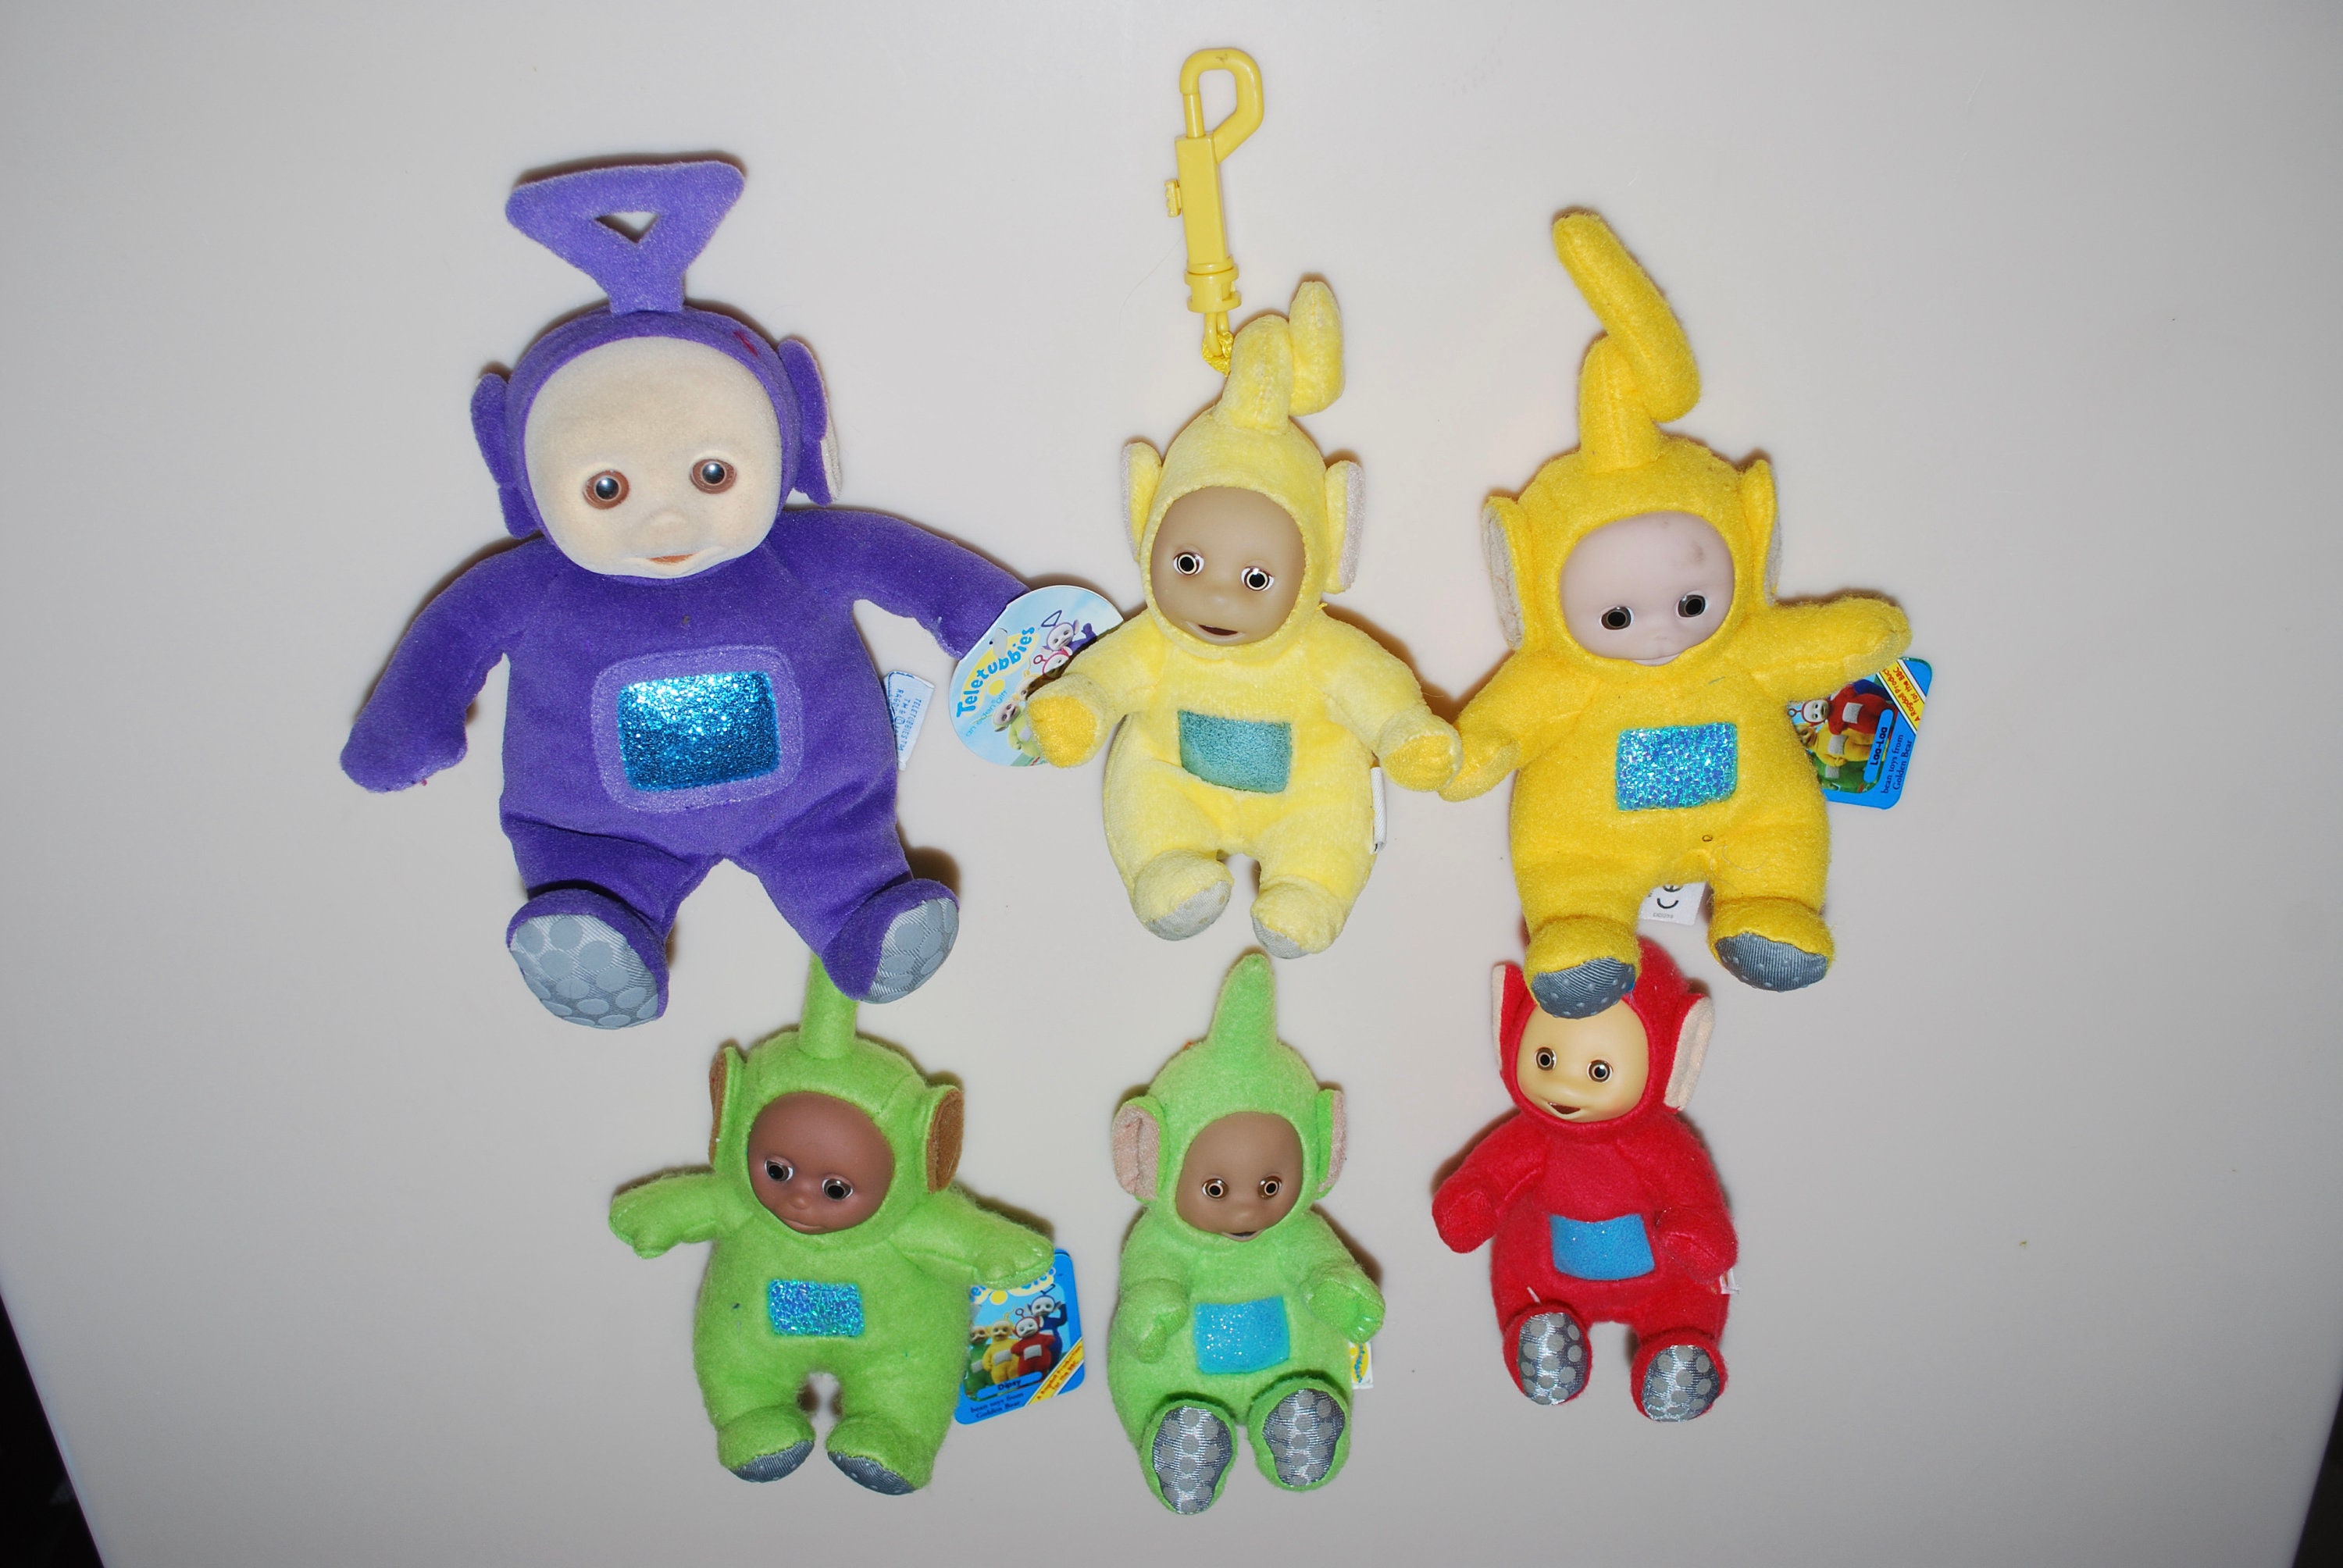 TELETUBBIE SOFT BEANIES PICTURE DOLLS TINKY WINKY DIPSY LAA LA PO APPROX 7" TALL 